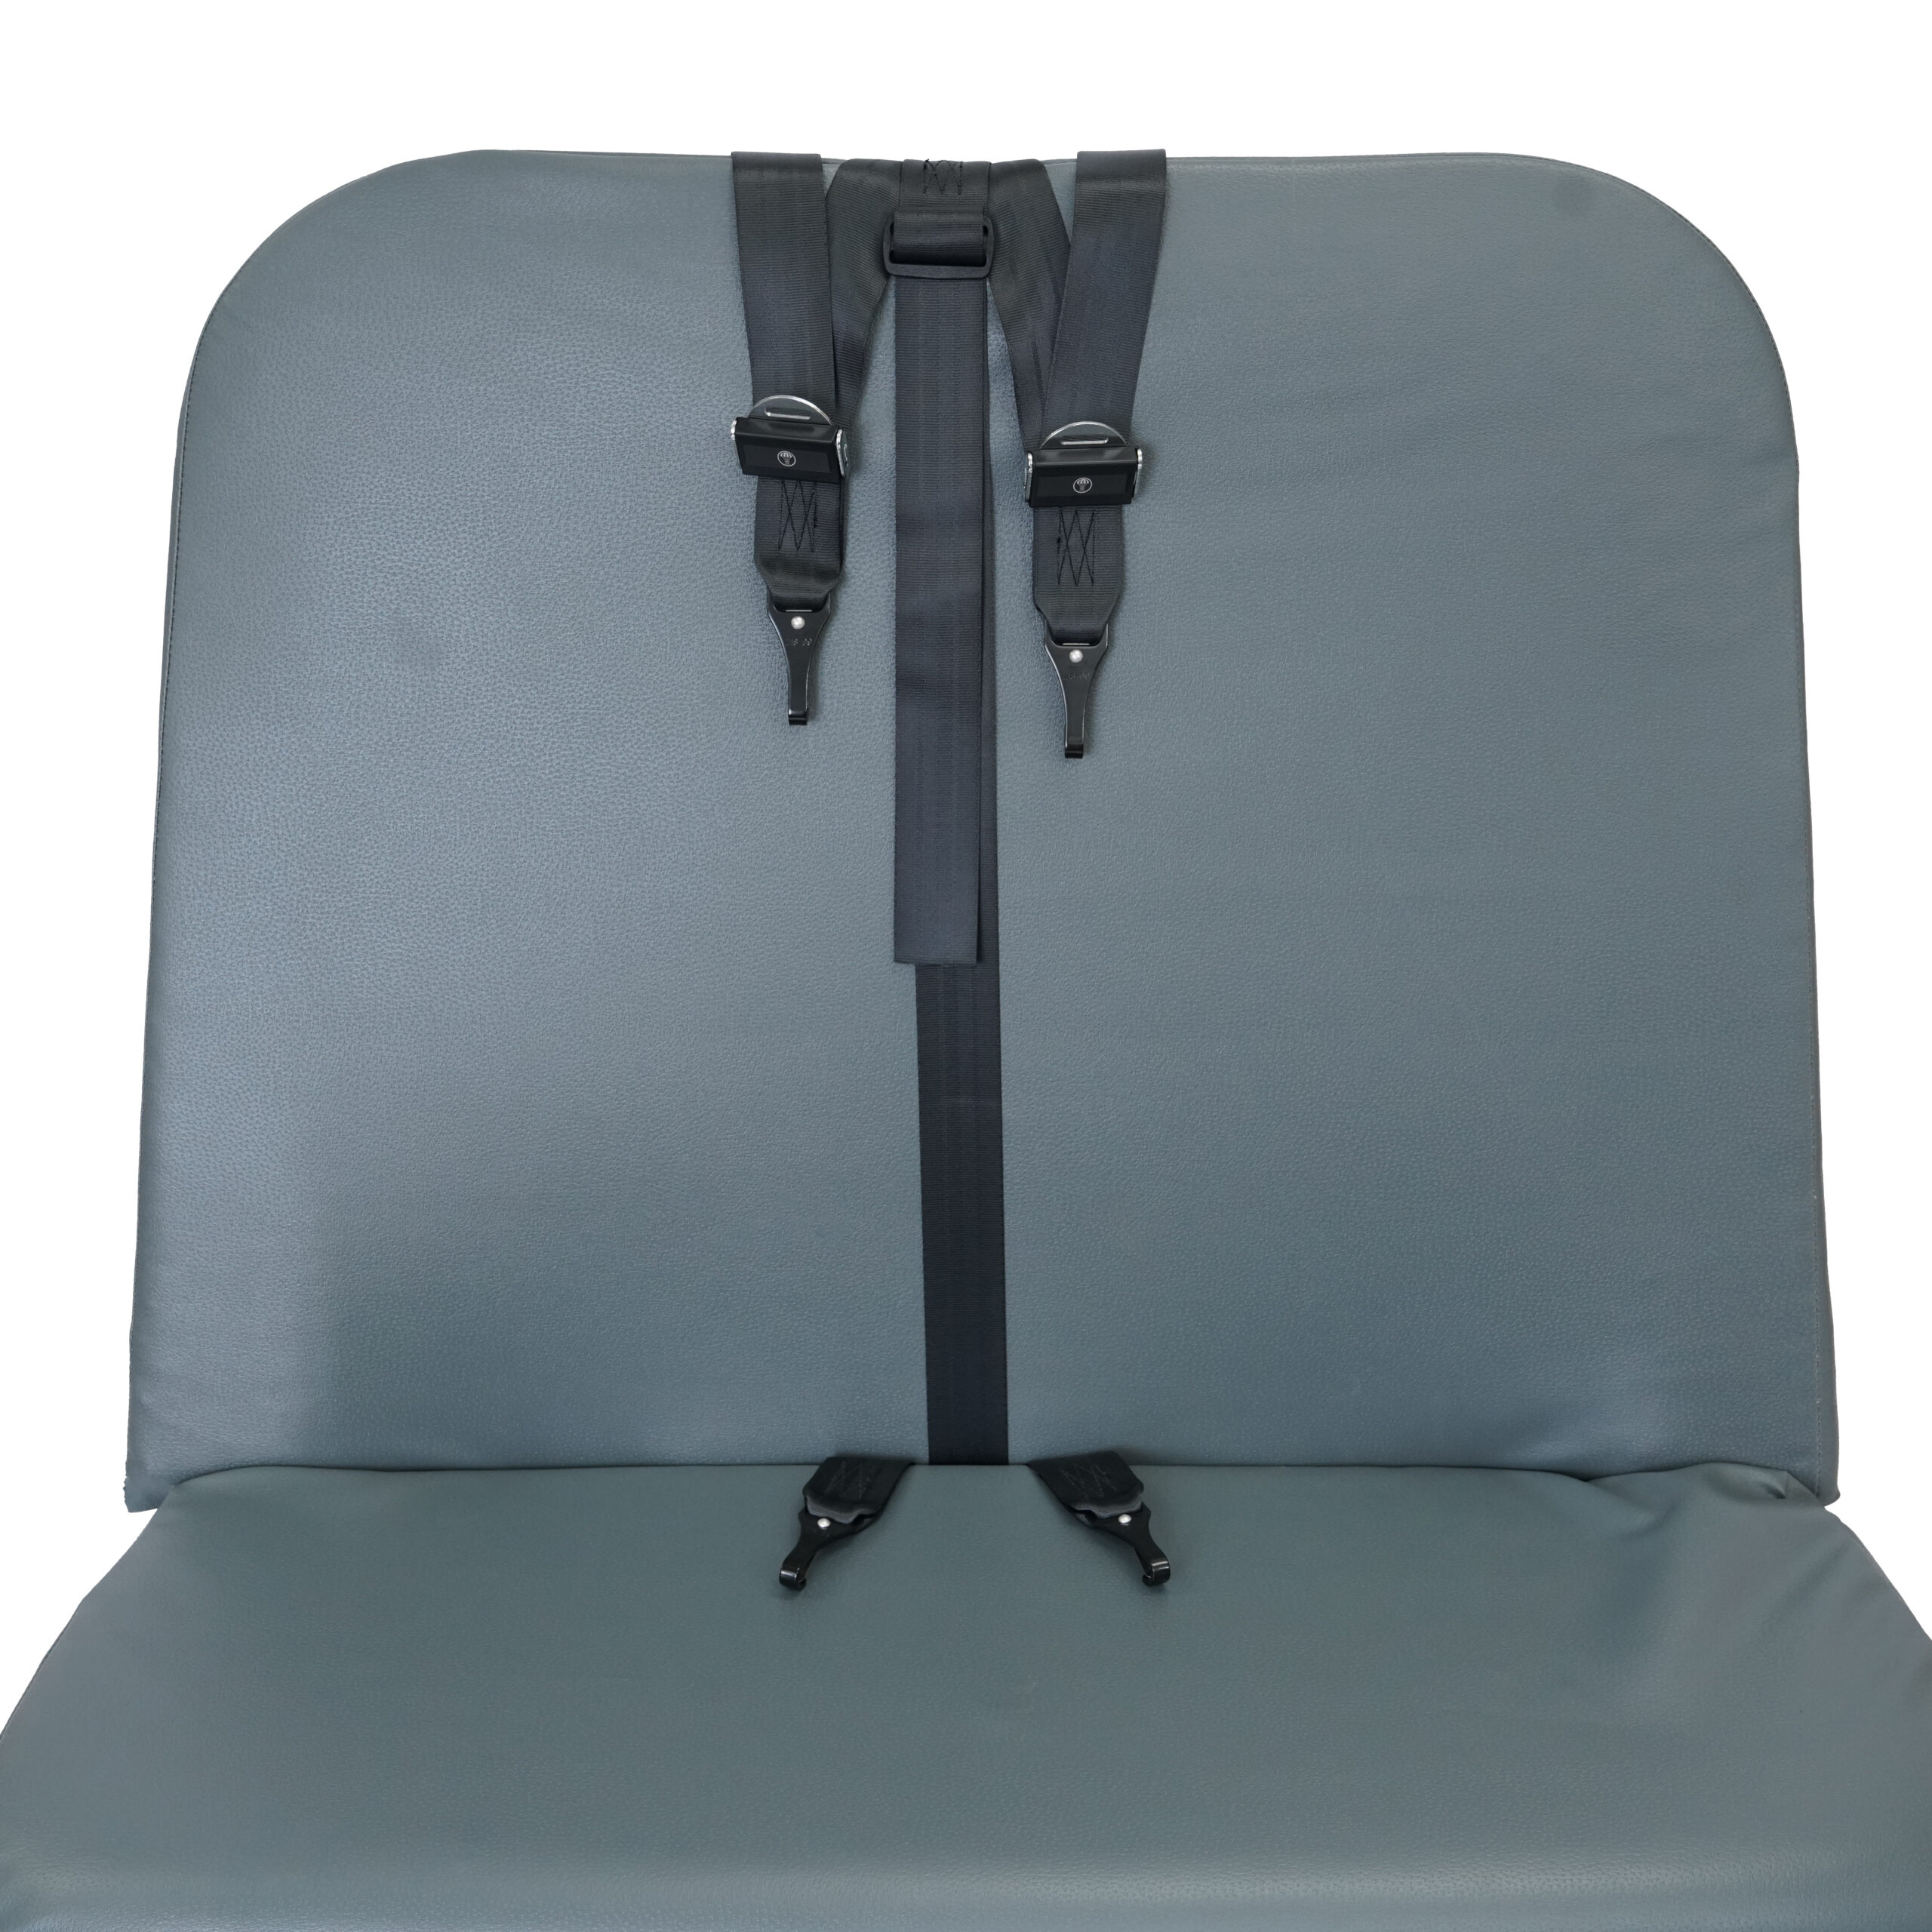 EZ-ON Transport Postural Harness with Bus Mount